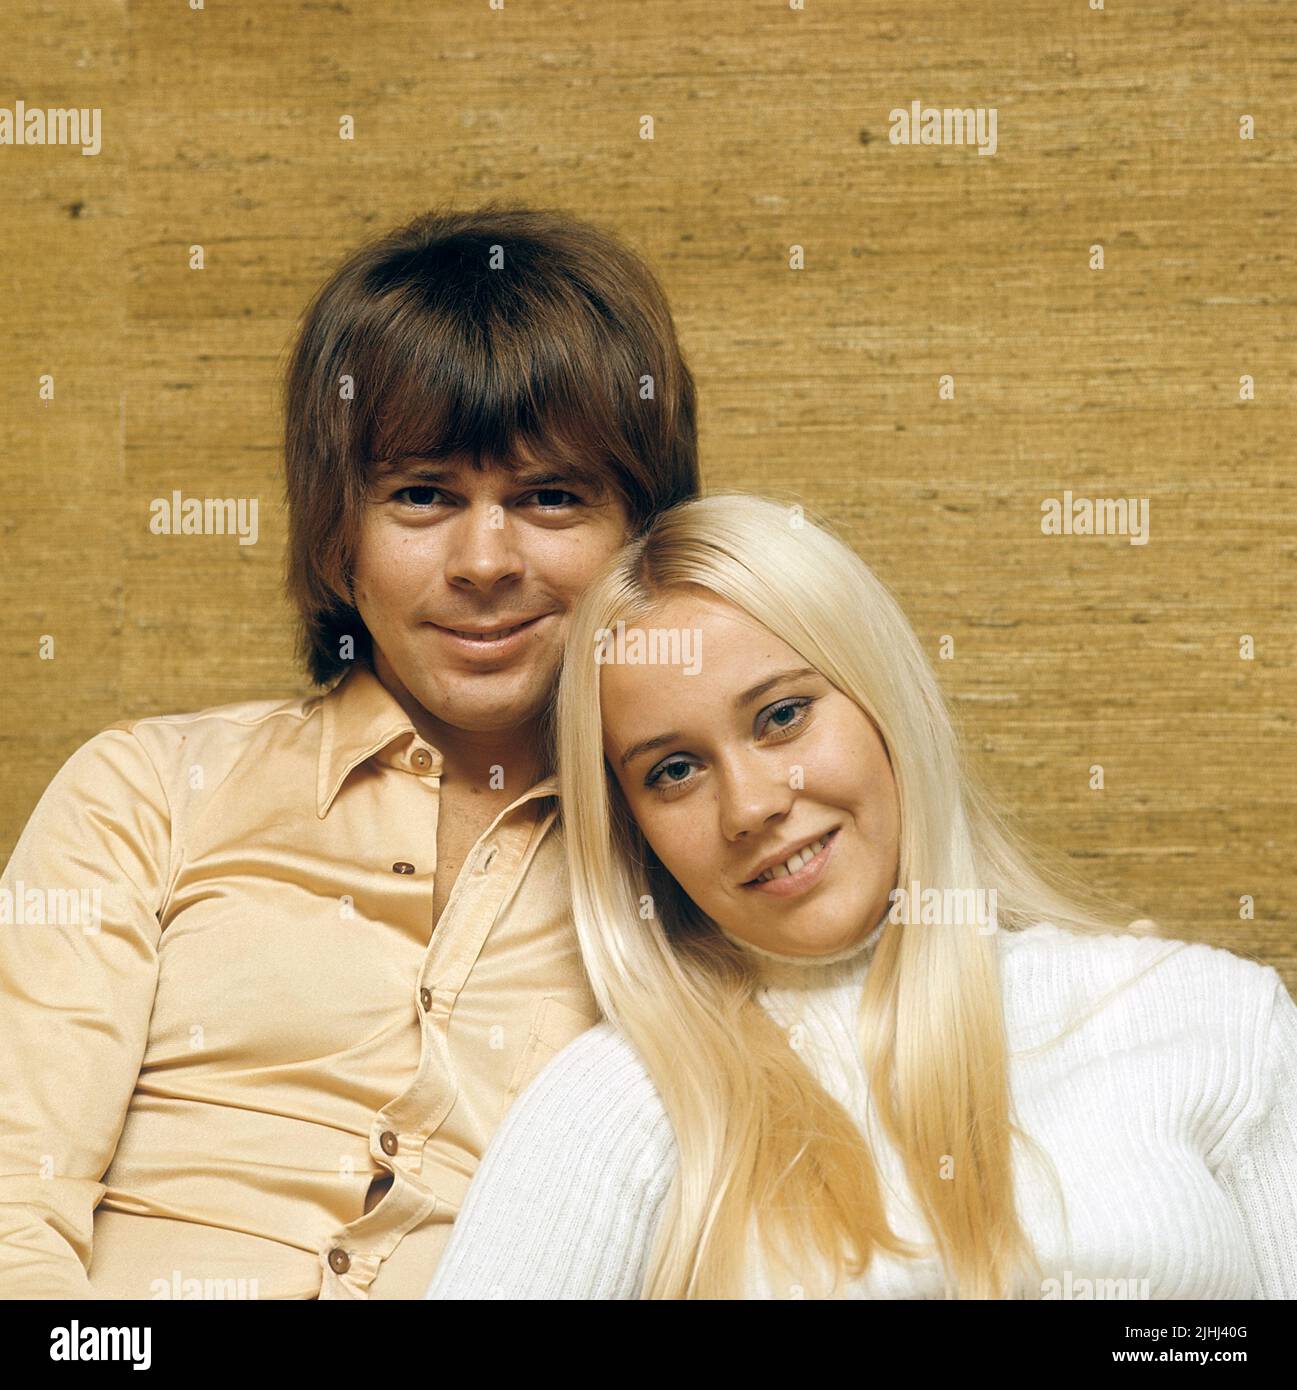 ABBA. Agnetha Fältskog. Singer. Member of the pop group ABBA. Born 1950. Pictured here at home with her fiance Björn Ulvaeus 1970 whom she married on 6 July 1971. Stock Photo